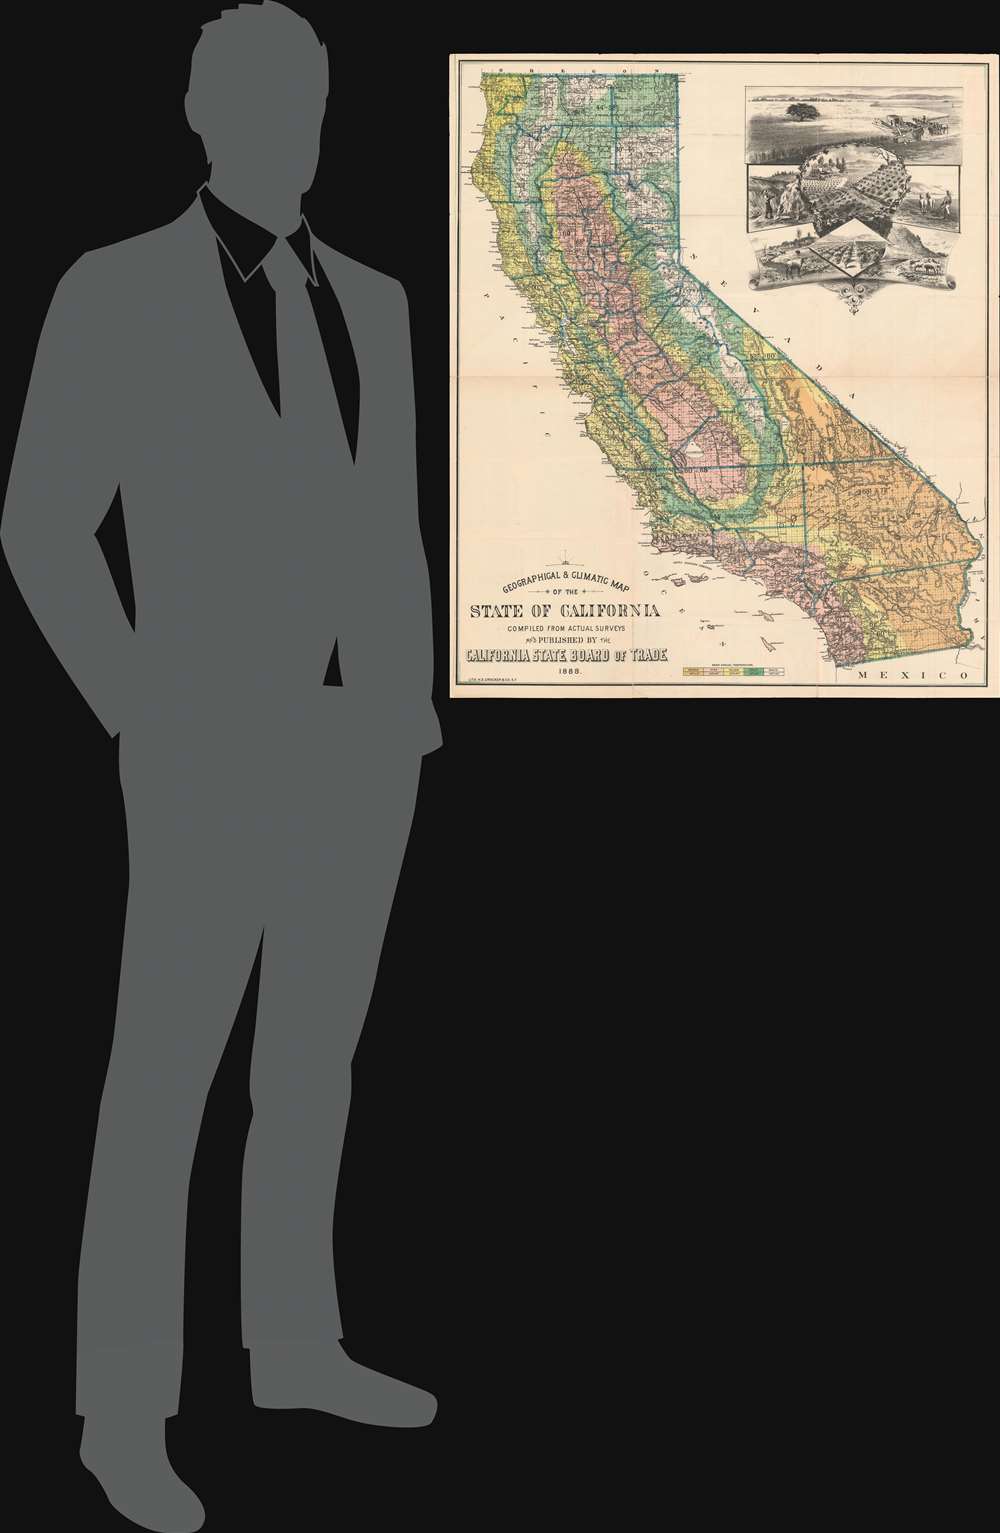 Geographical and Climatic Map of the State of California. - Alternate View 1